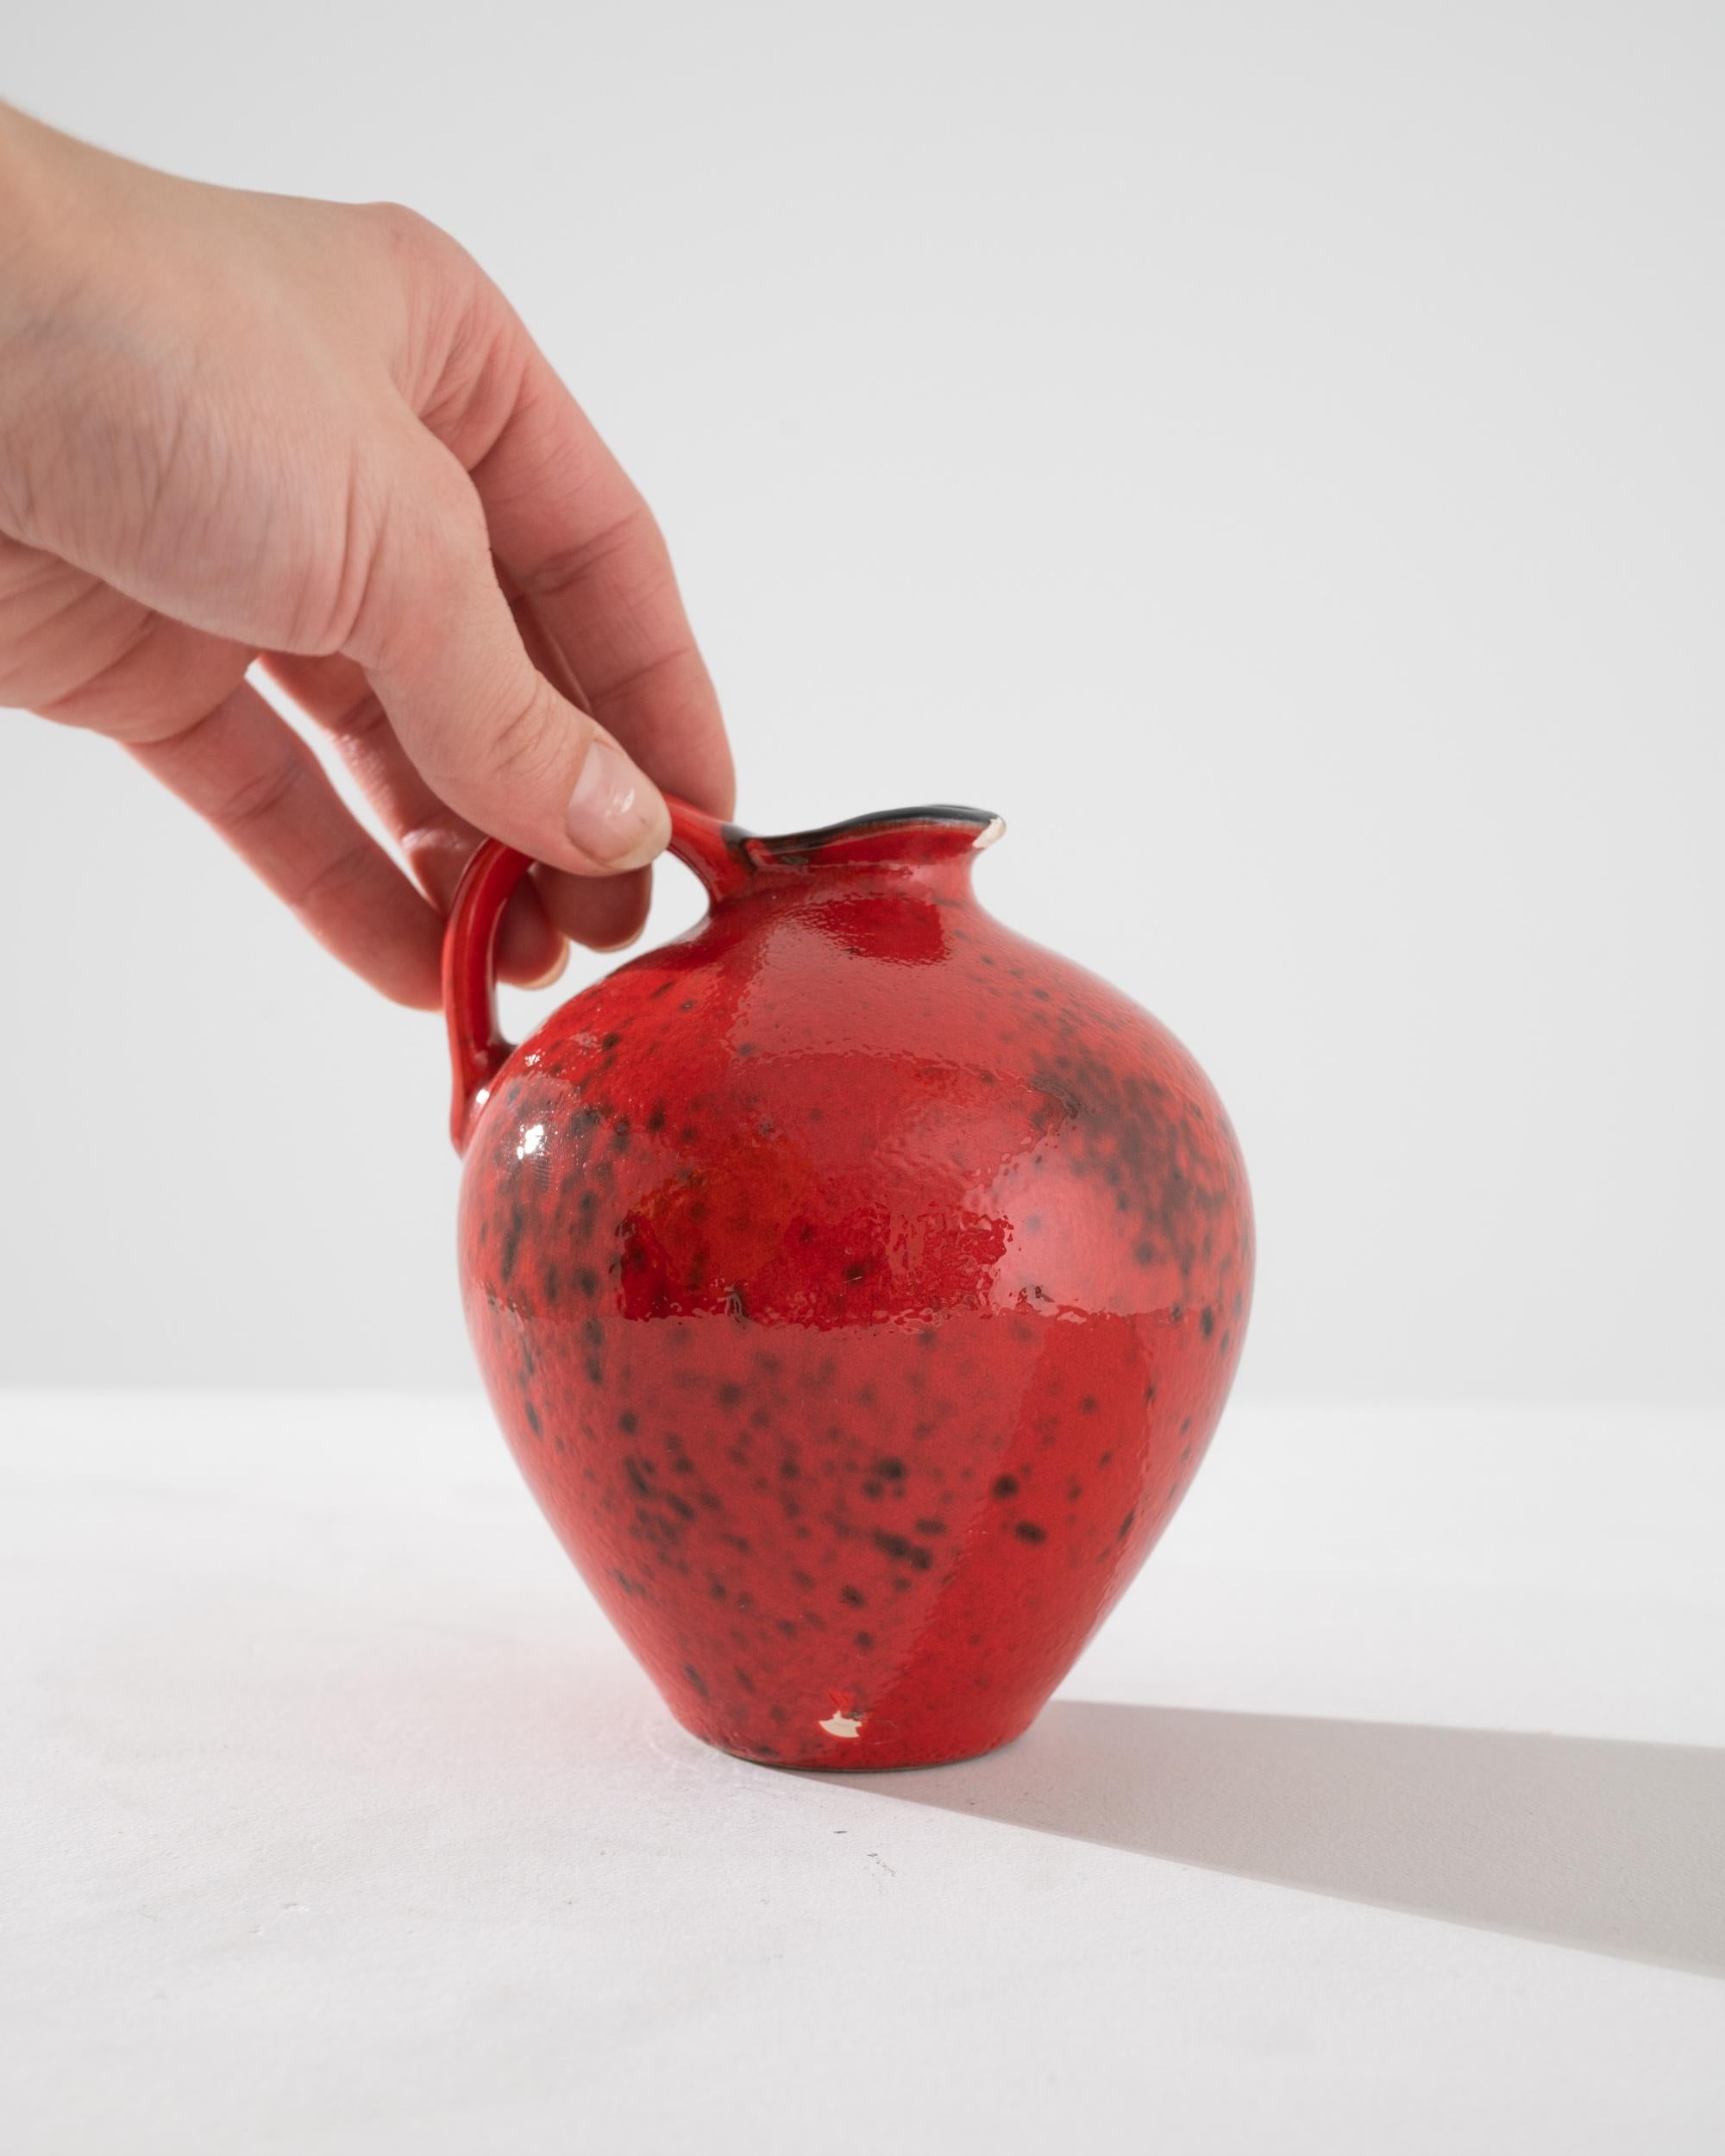 This 20th Century German ceramic jug is a striking example of functional art. The jug's vibrant red glaze, speckled with darker accents, gives it a lively, volcanic appearance that is both eye-catching and elegant. The robust form is balanced by the